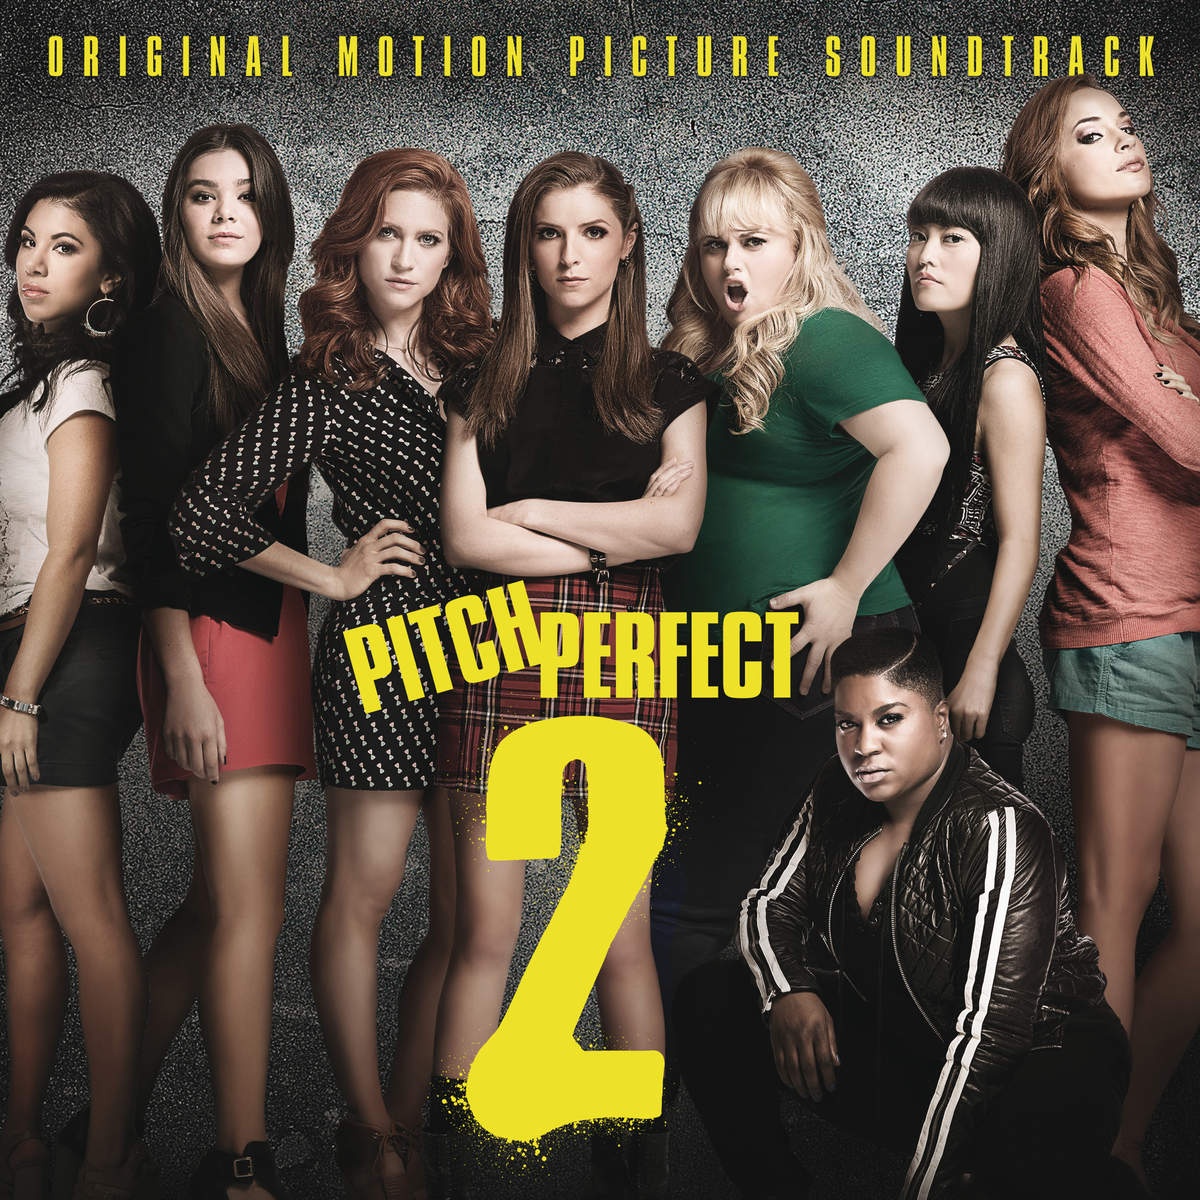 Back To Basics - From "Pitch Perfect 2" Soundtrack